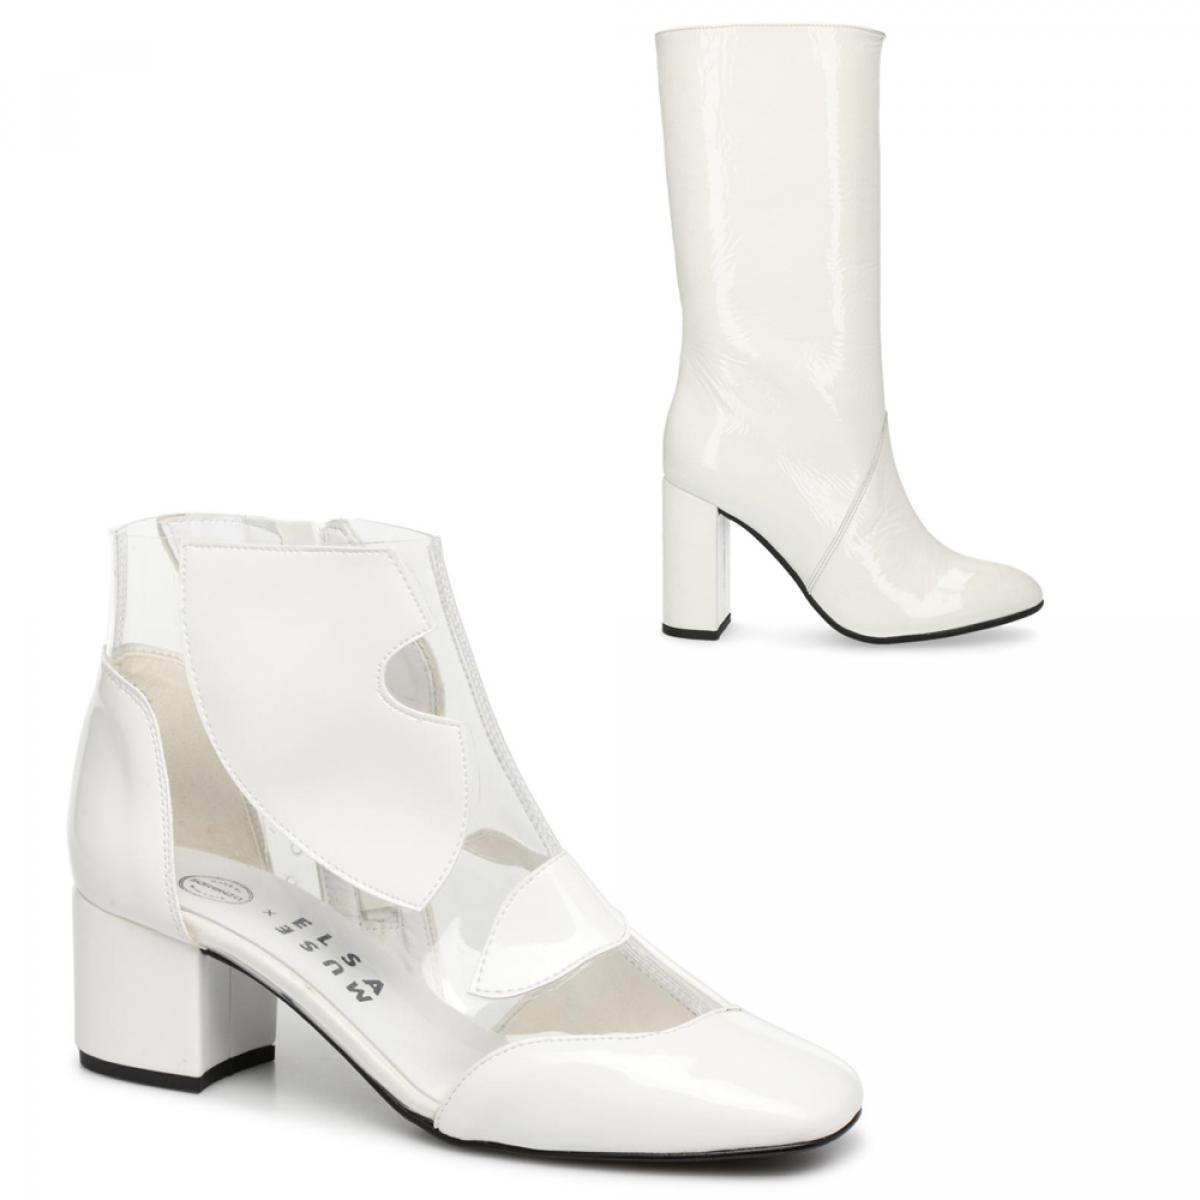 Bottes blanches